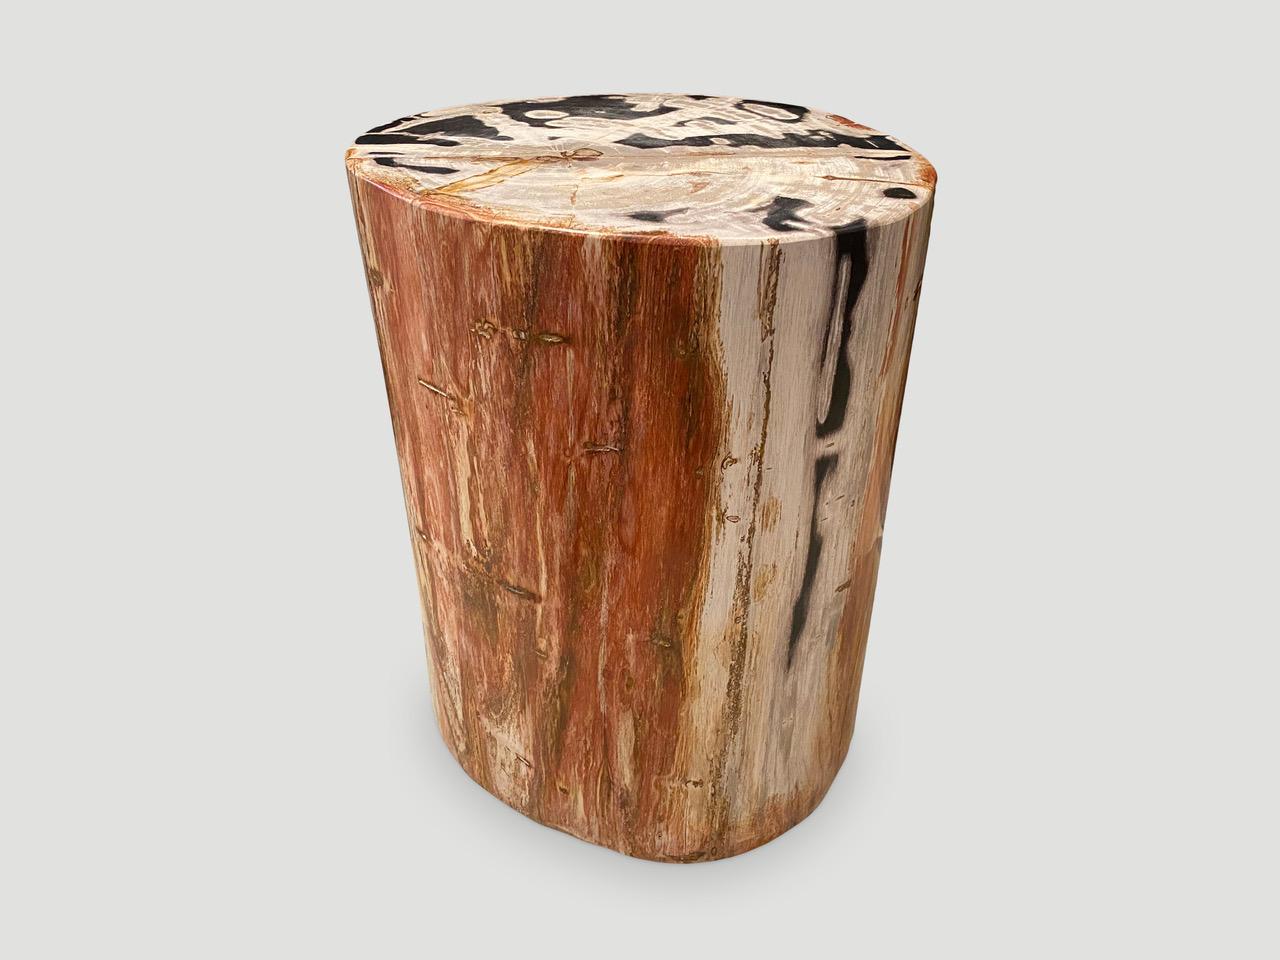 Stunning unusual colors in this beautiful petrified wood side table. It’s fascinating how Mother Nature produces these exquisite 40 million year old petrified teak logs with such contrasting colors and natural patterns throughout. Modern yet with so